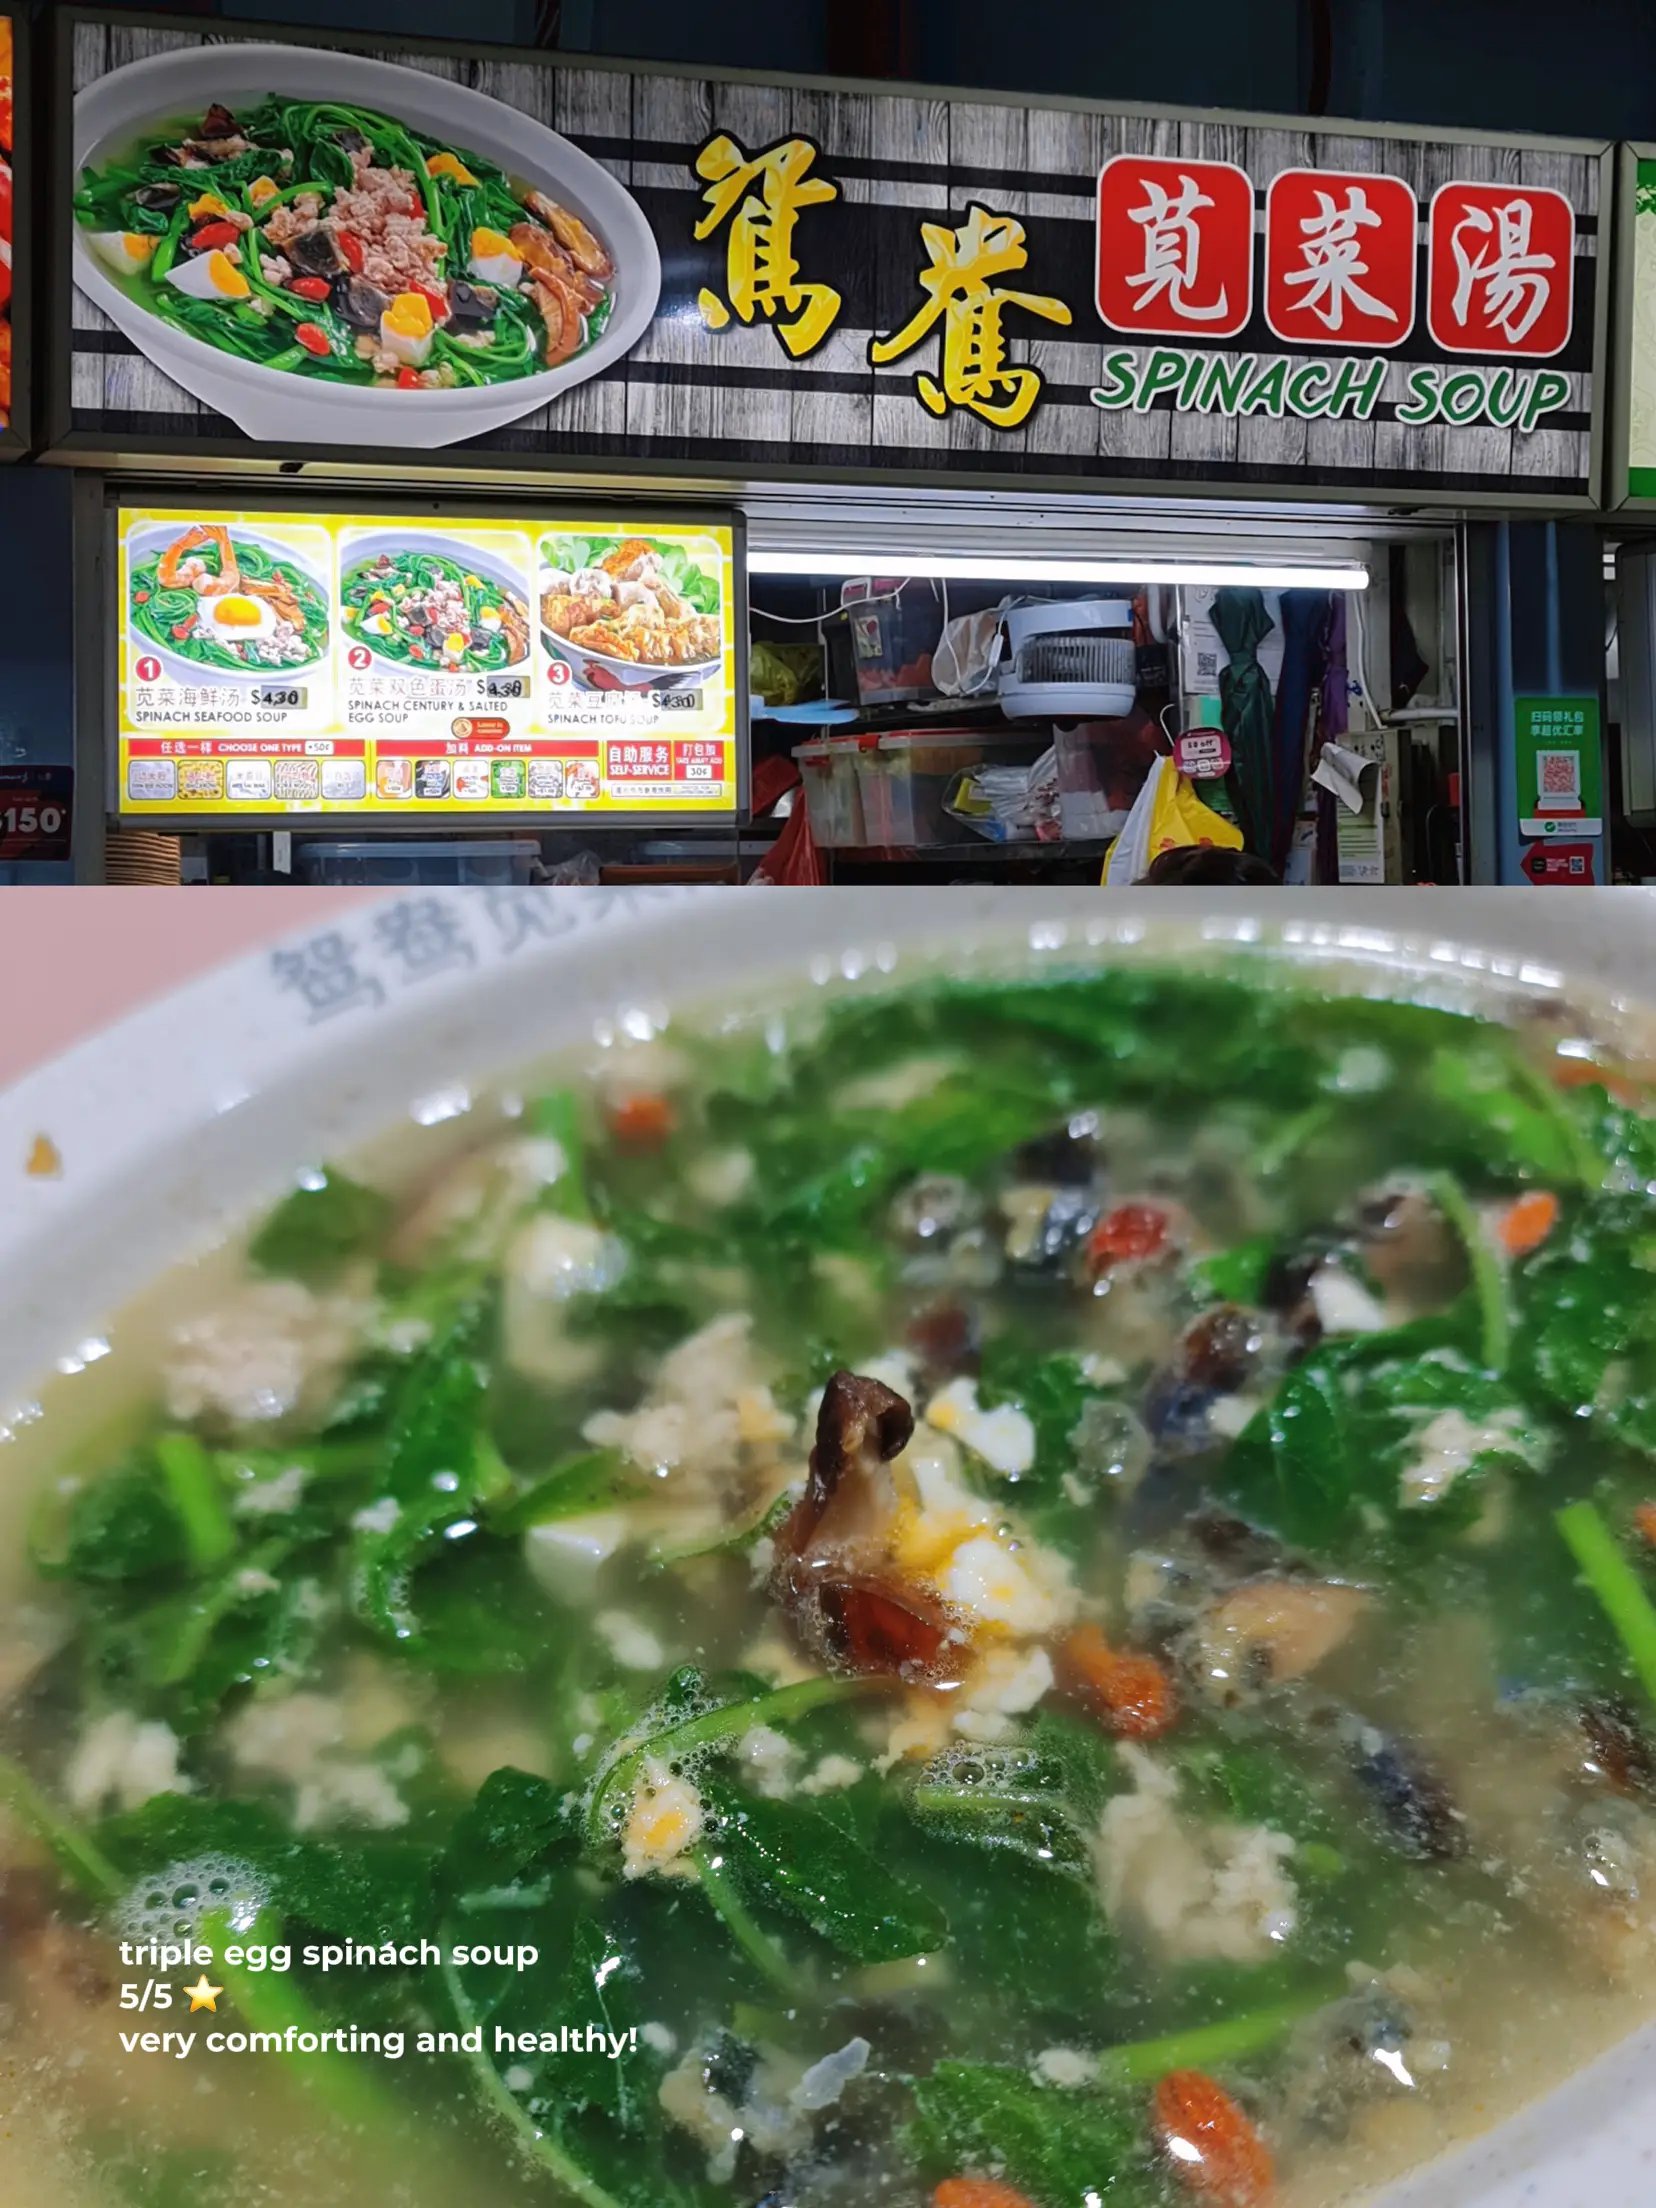 my reco for healthier eats at chinatown complex! 's images(2)